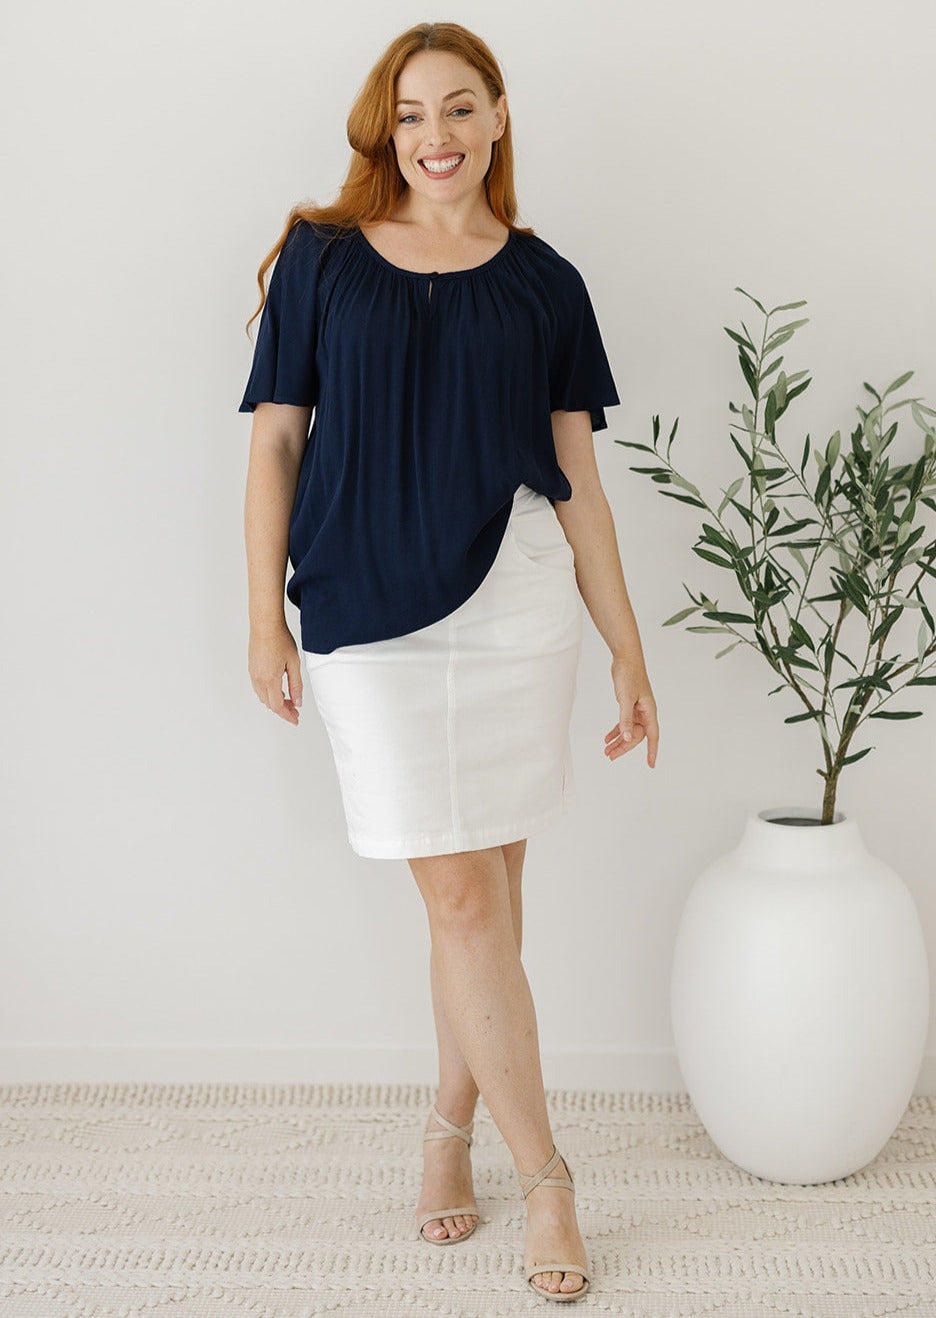 flowy navy blouse with flutter sleeves